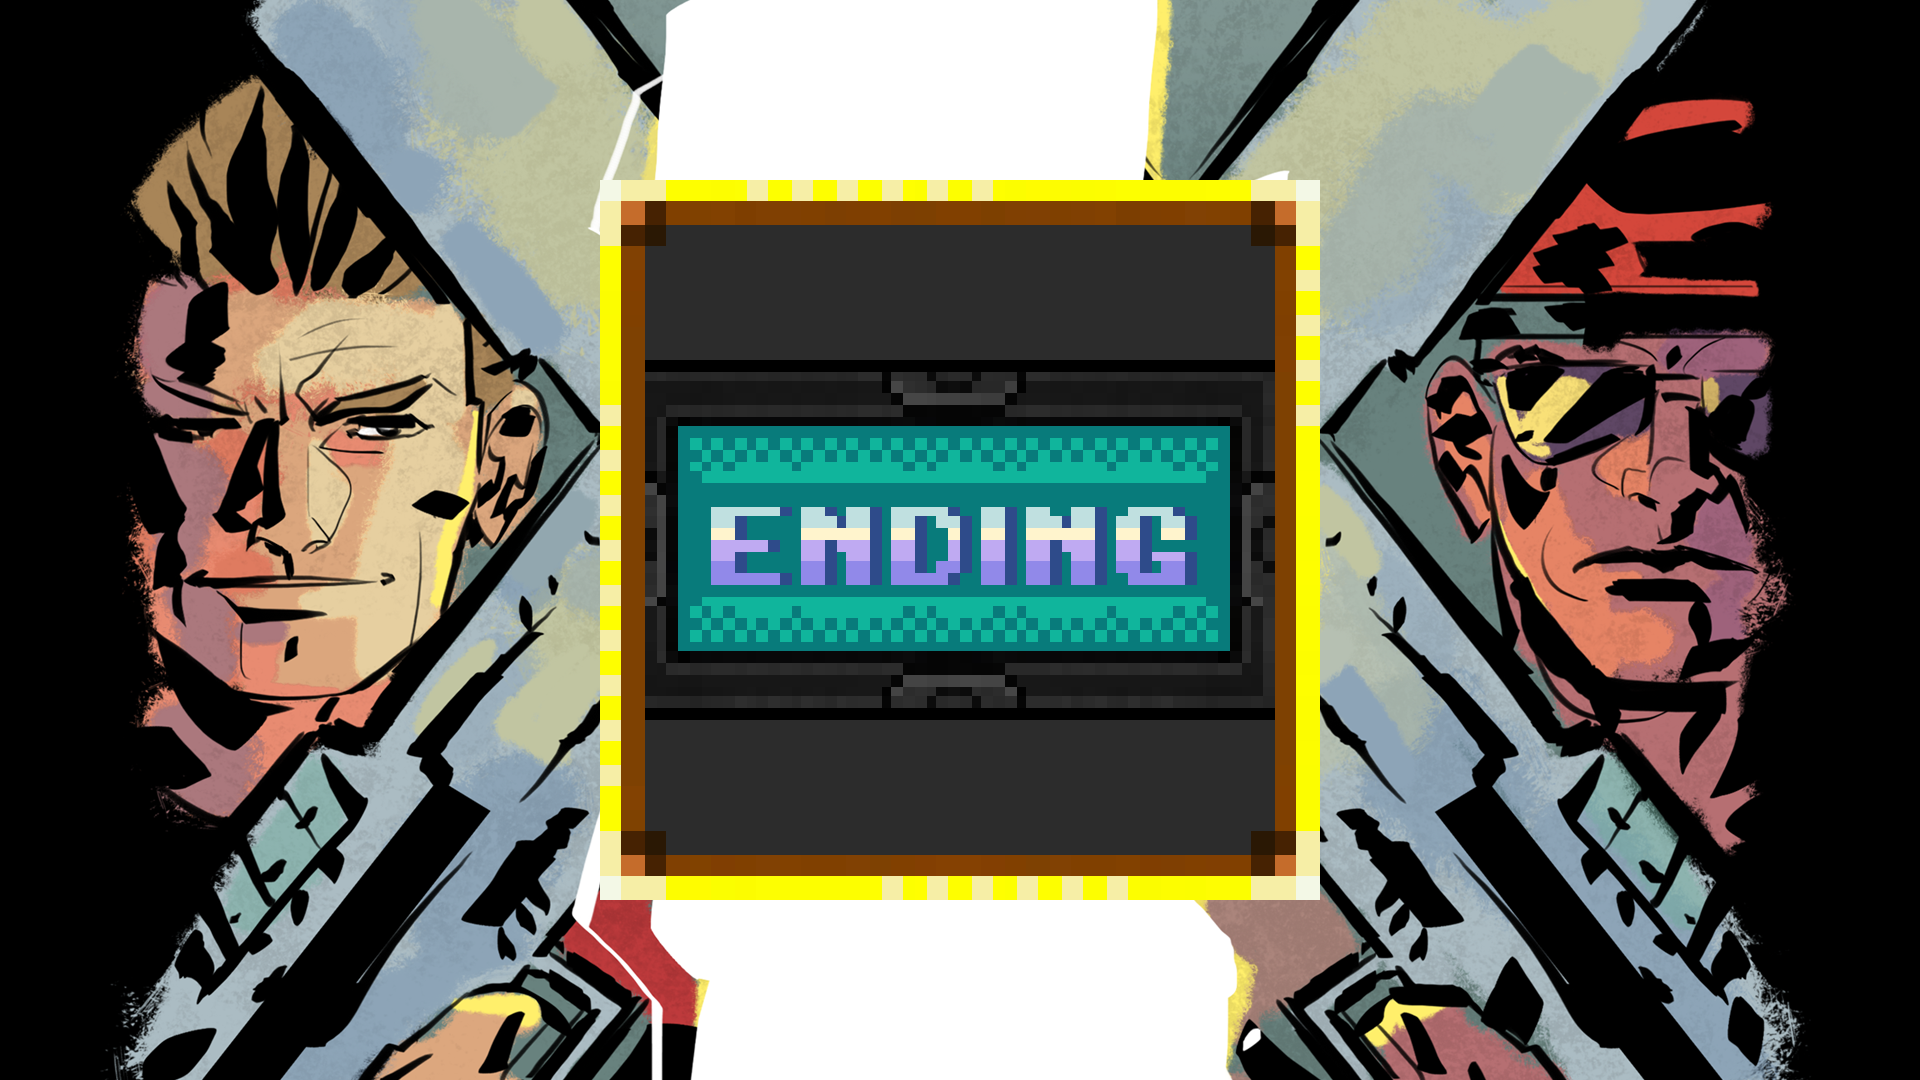 Icon for Standard Ending